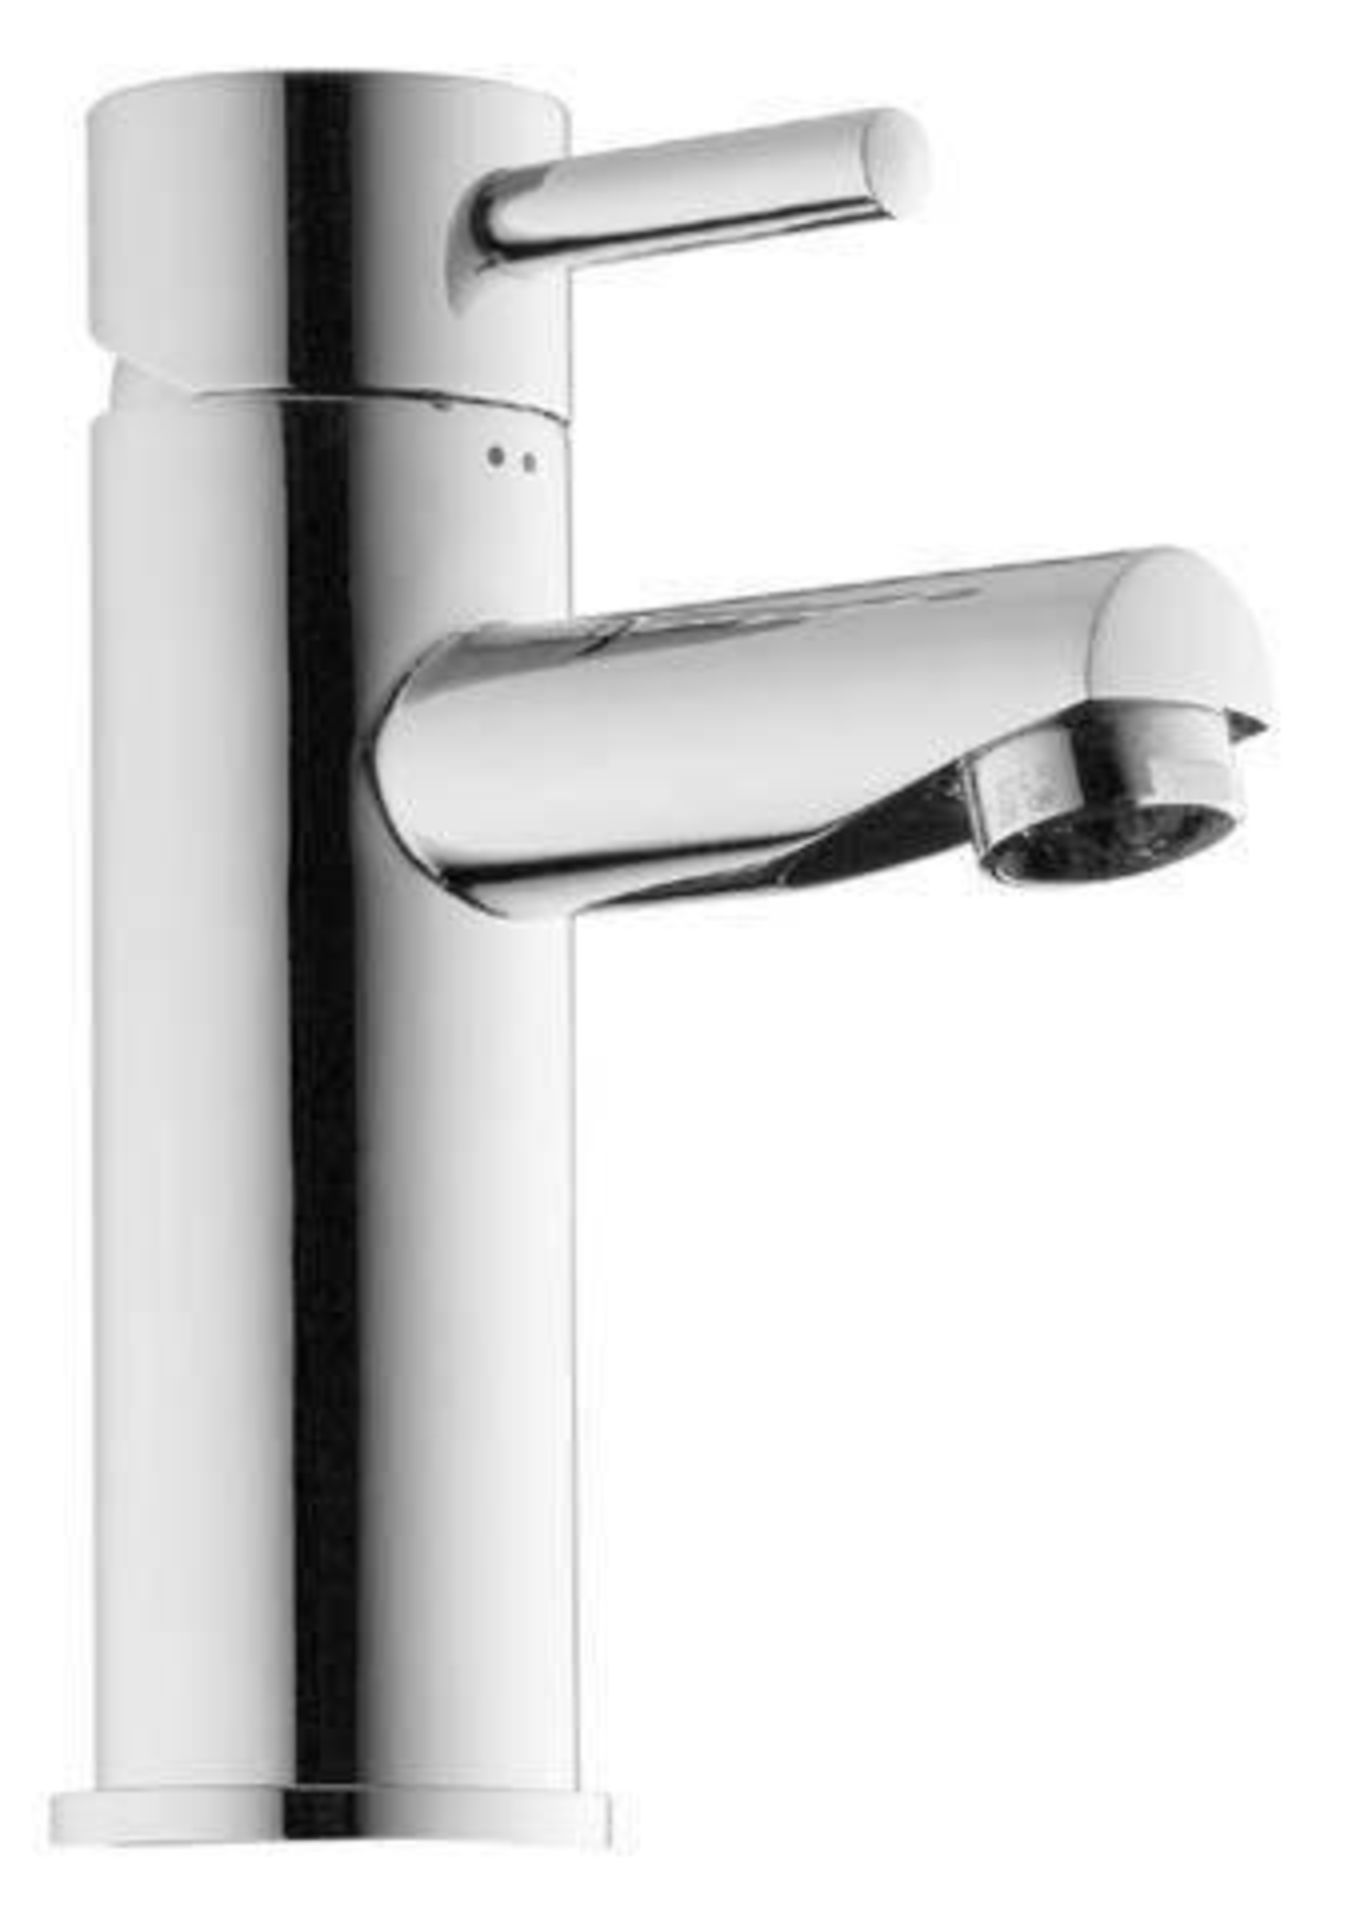 1 x Ideal Standard JADO "Geometry" Single Lever Deck-Mounted Basin Mixer Without Waste Set (F1271AA)